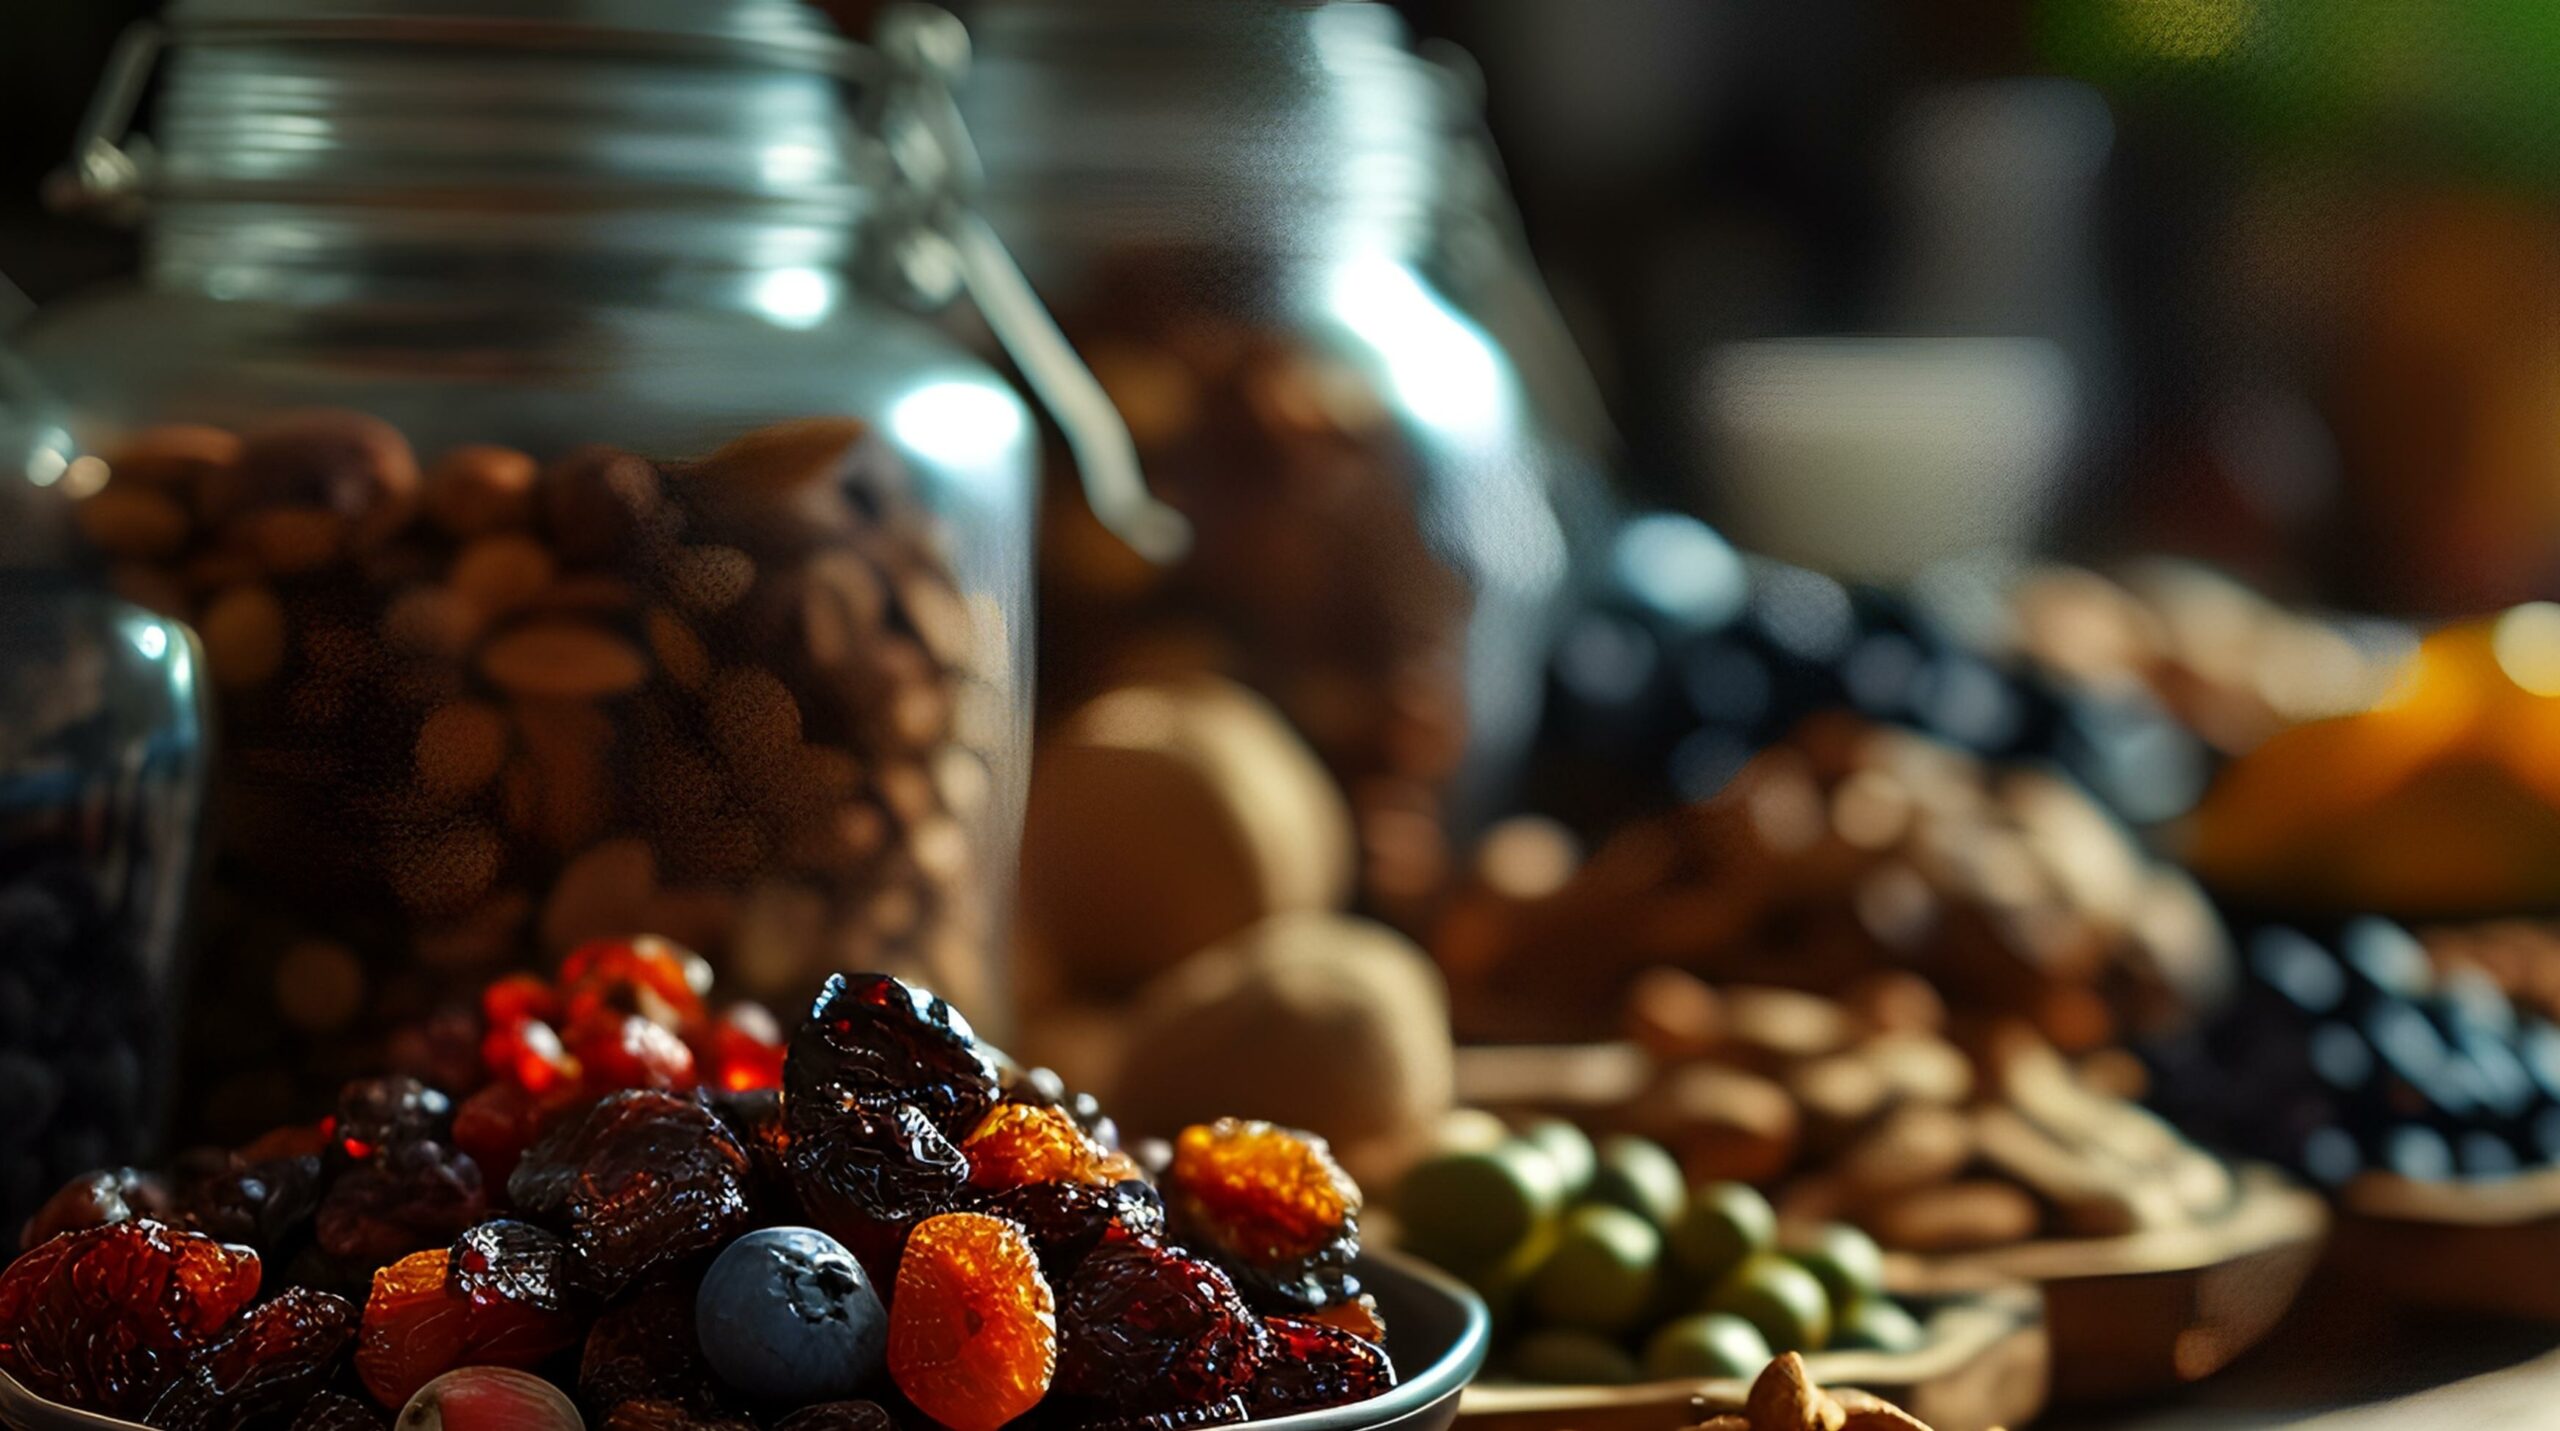 Healthy food. Assortment of dried fruits and nuts on a wooden table